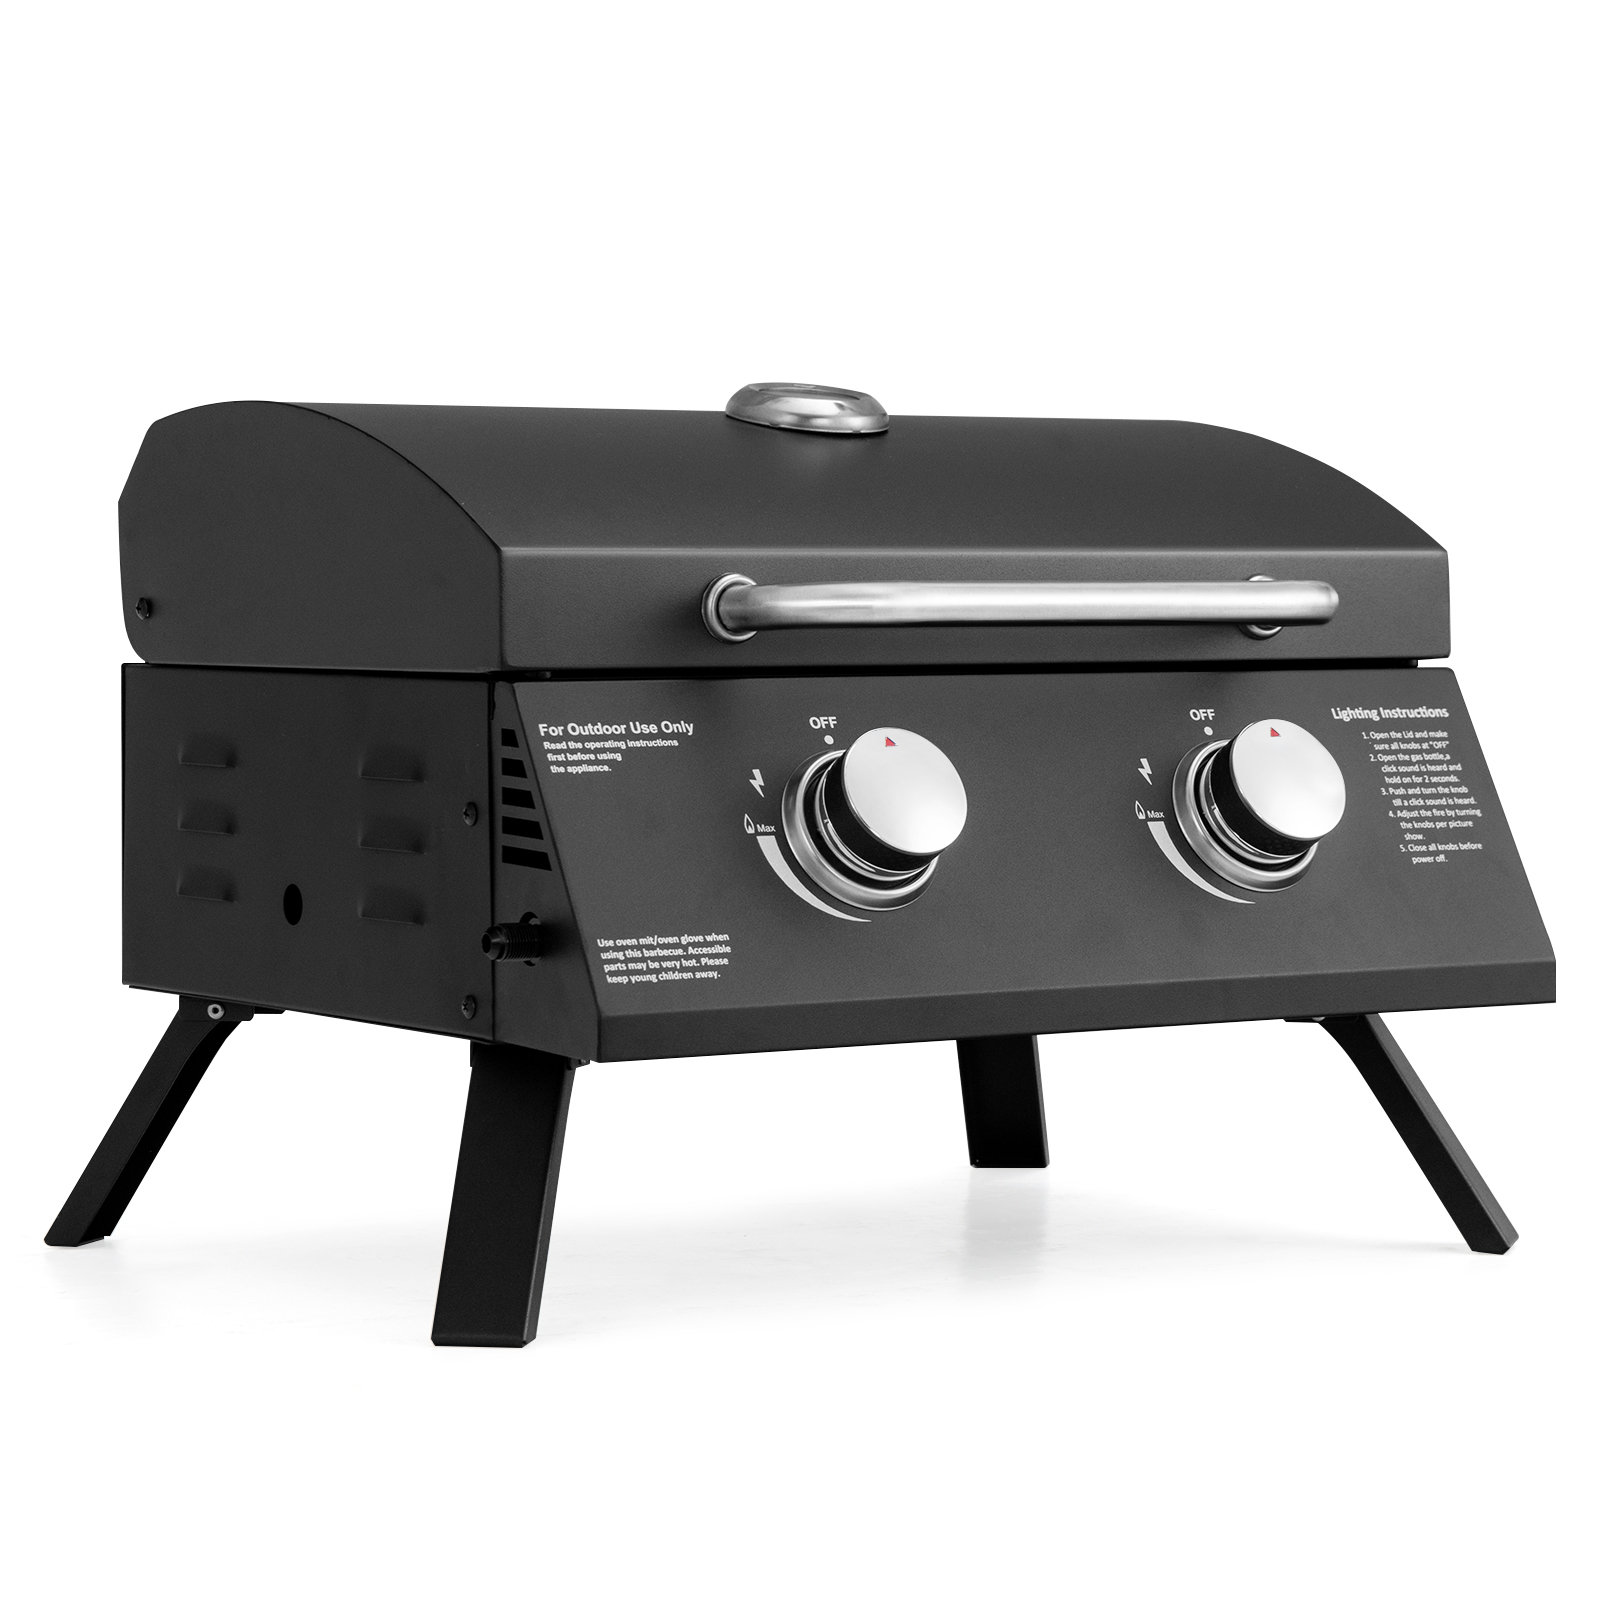 1 Burner Portable Gas Table Top Grill